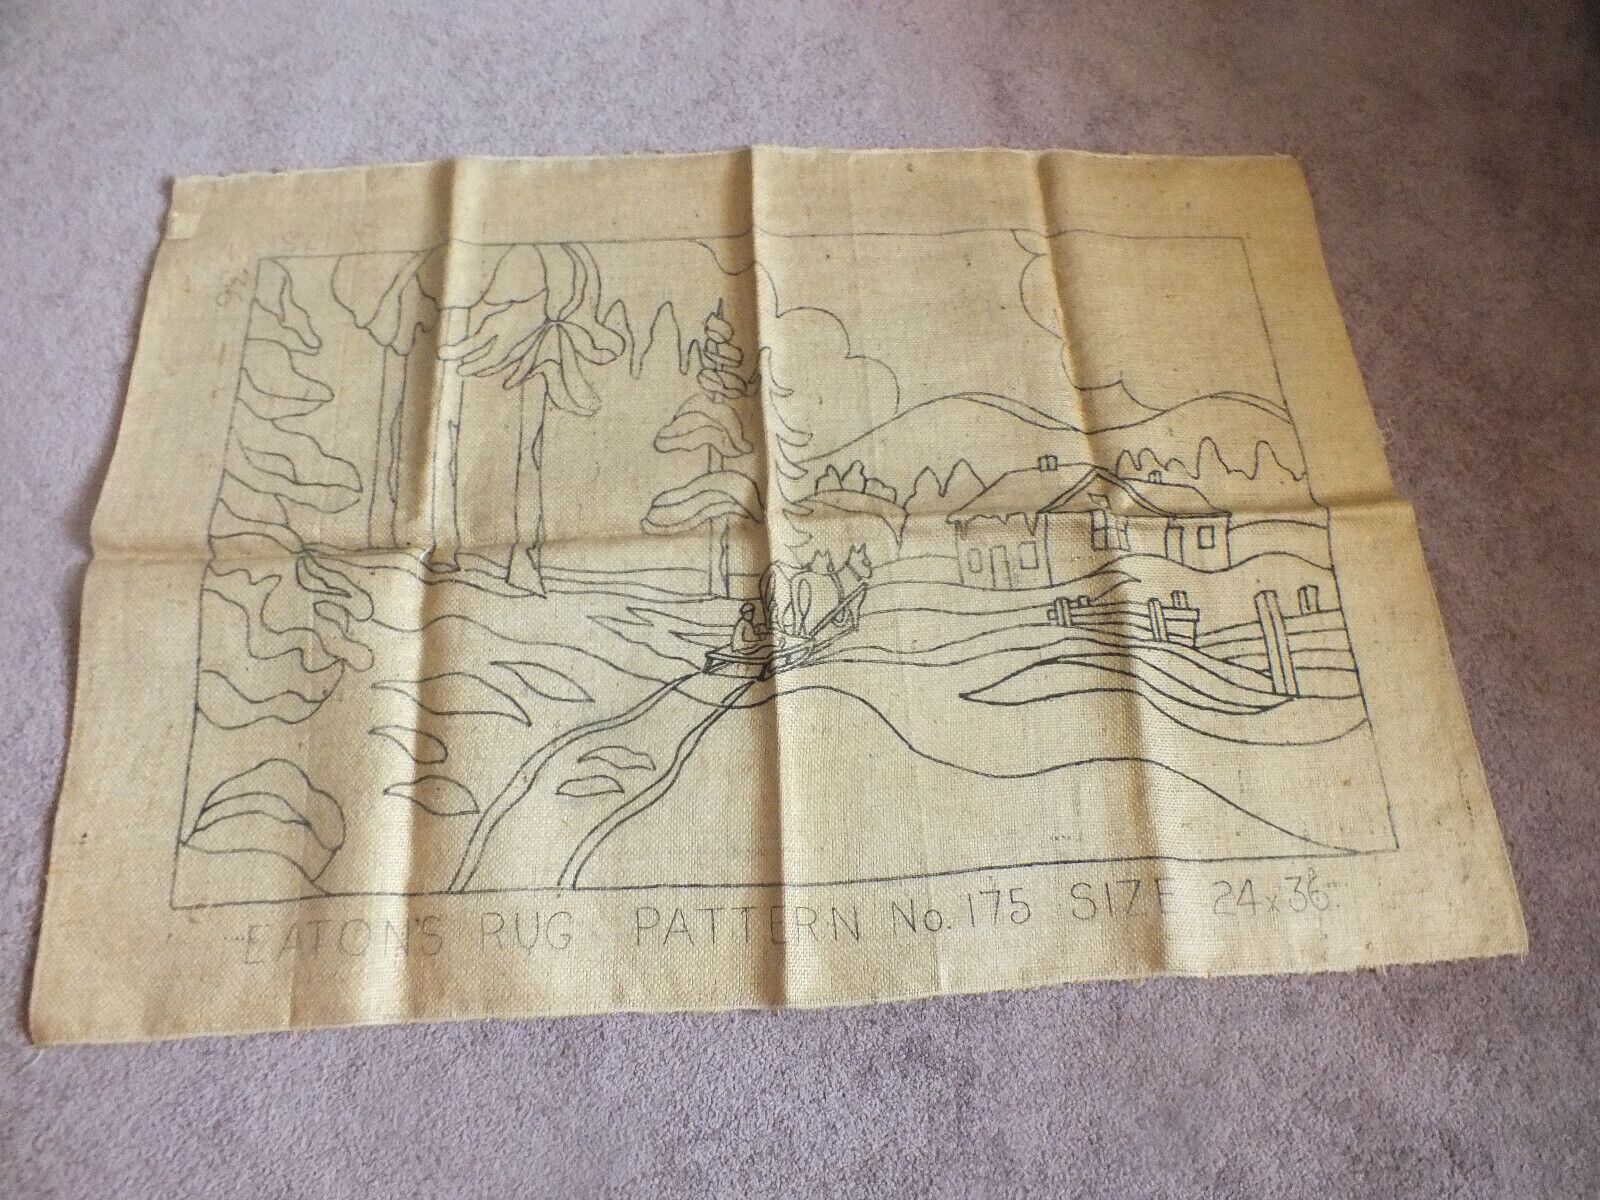 Collectible Signed Eaton's Rug Pattern 24 x 36" Burlap House Trees Horse Sled